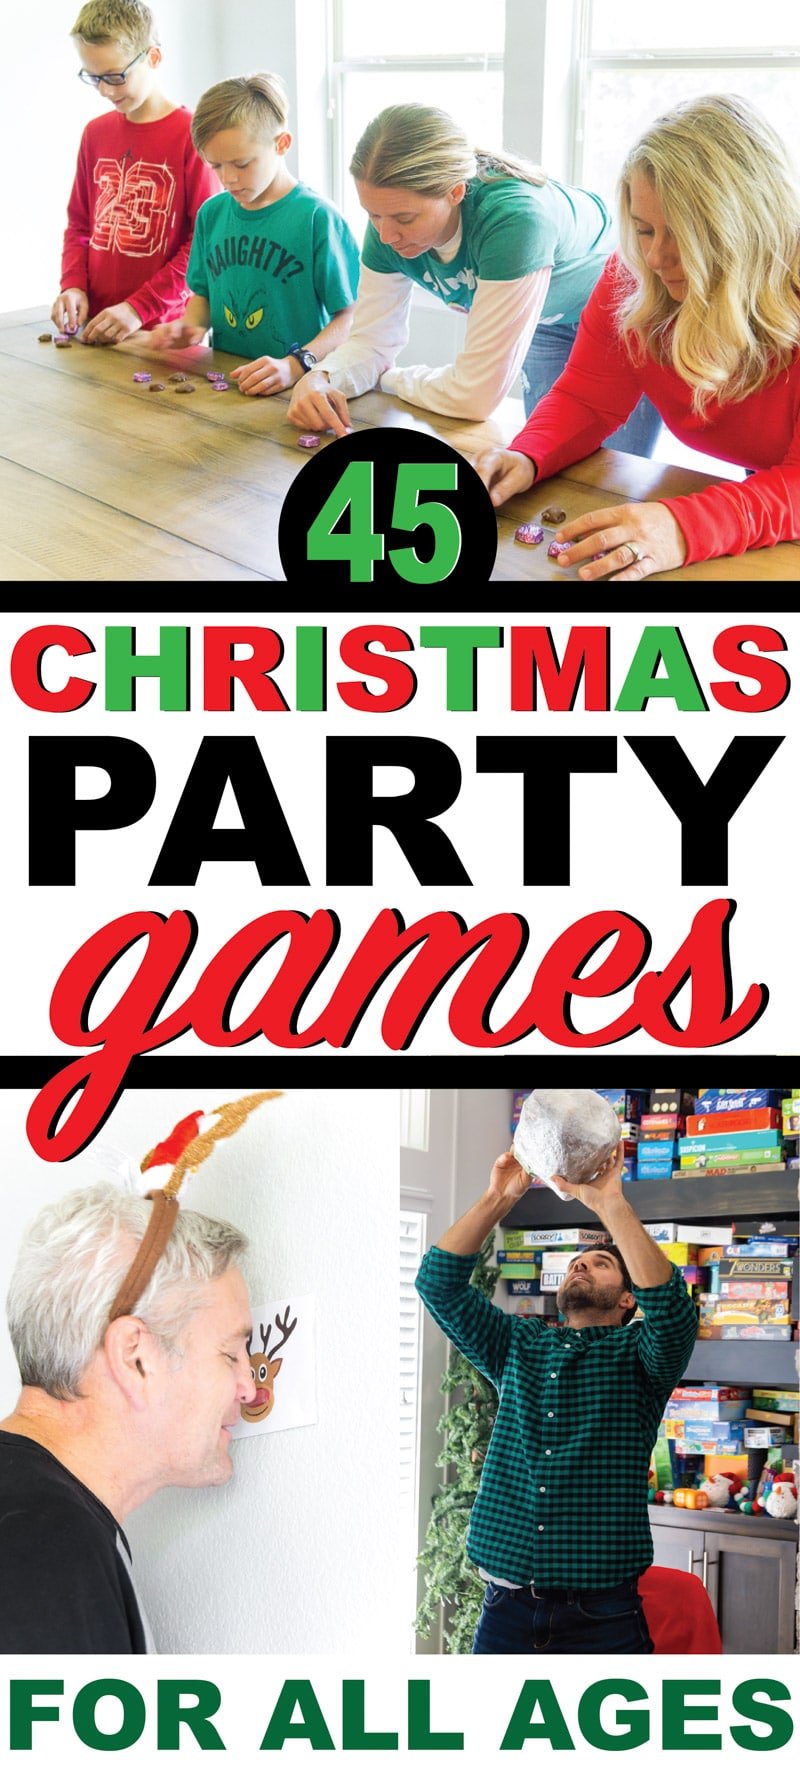 25-christmas-party-games-just-for-the-adults-2023-best-the-best-famous